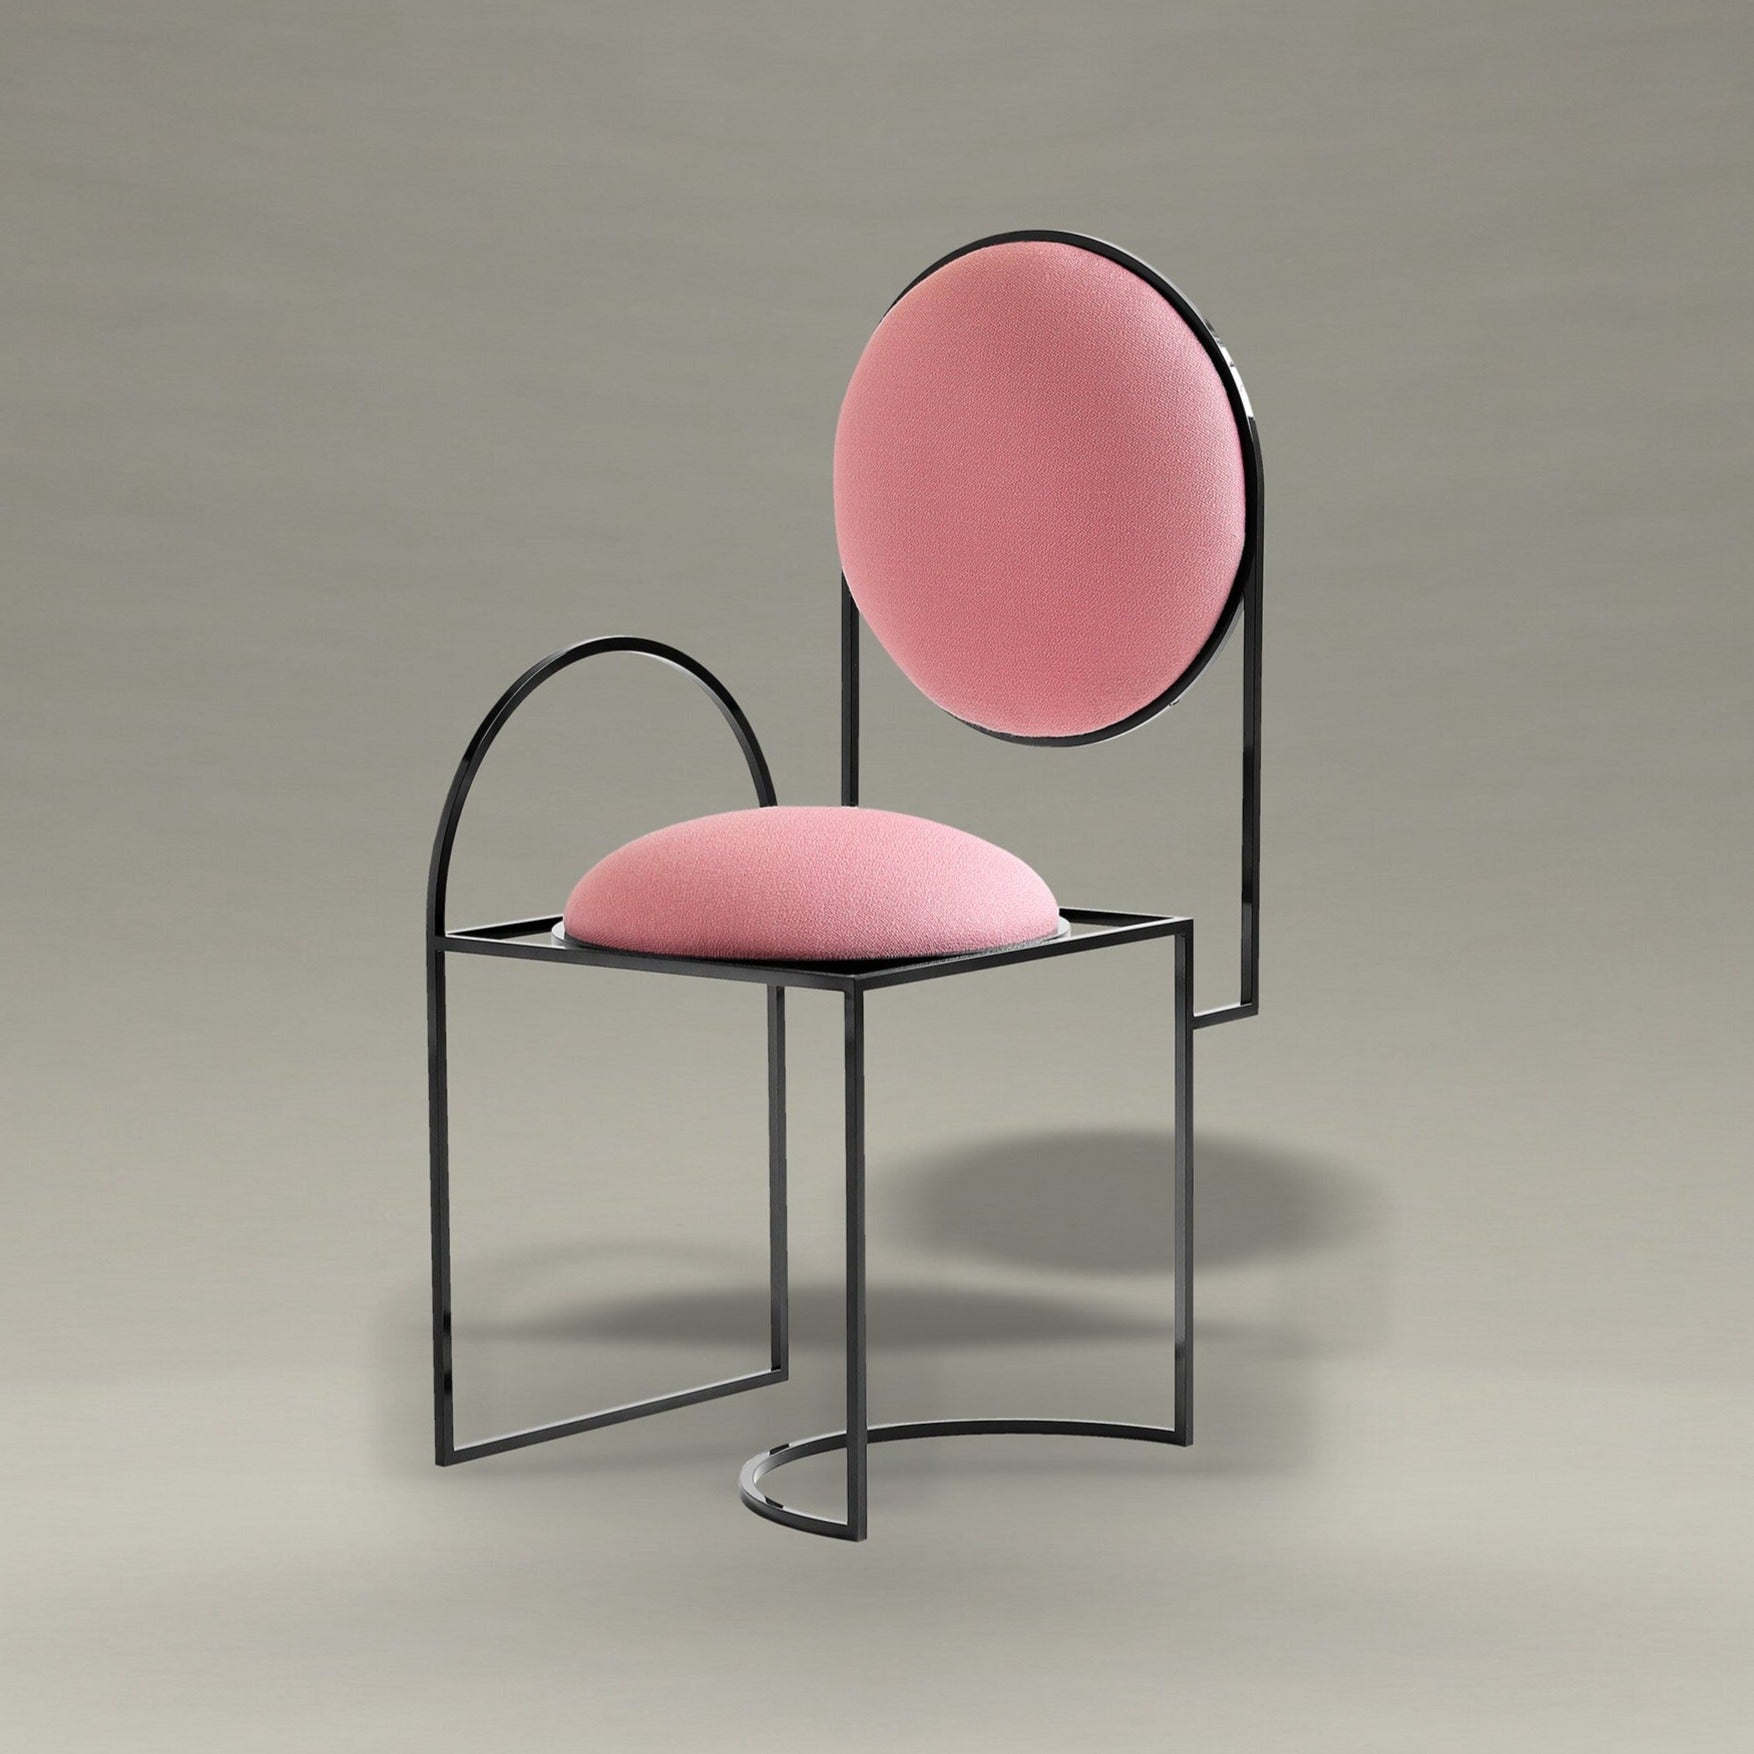 SOLAR CHAIR <br>PINK